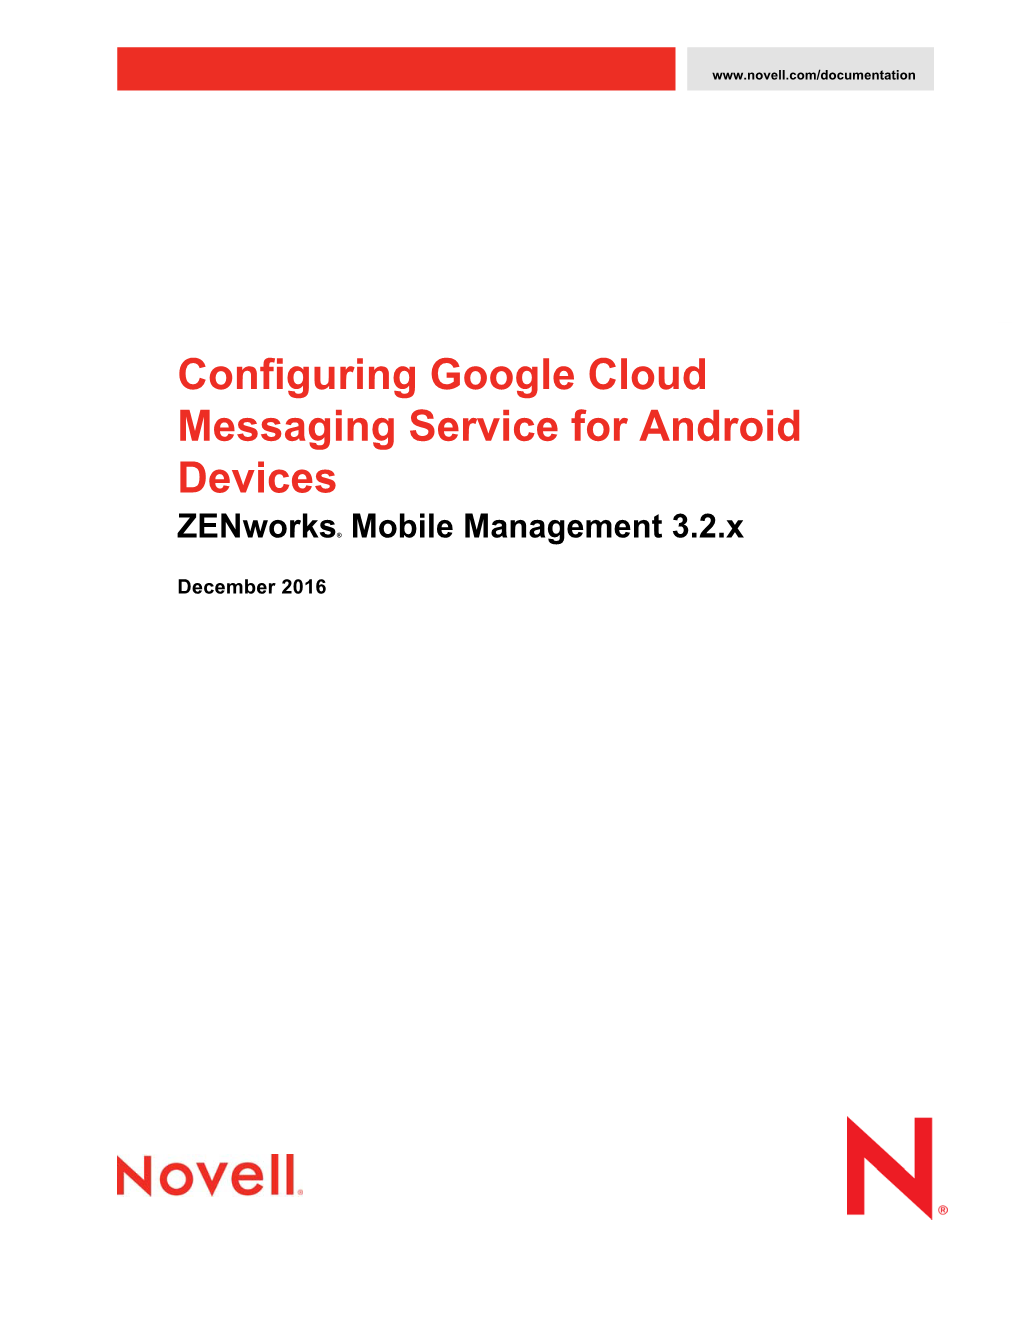 Configuring Google Cloud Messaging Service for Android Devices